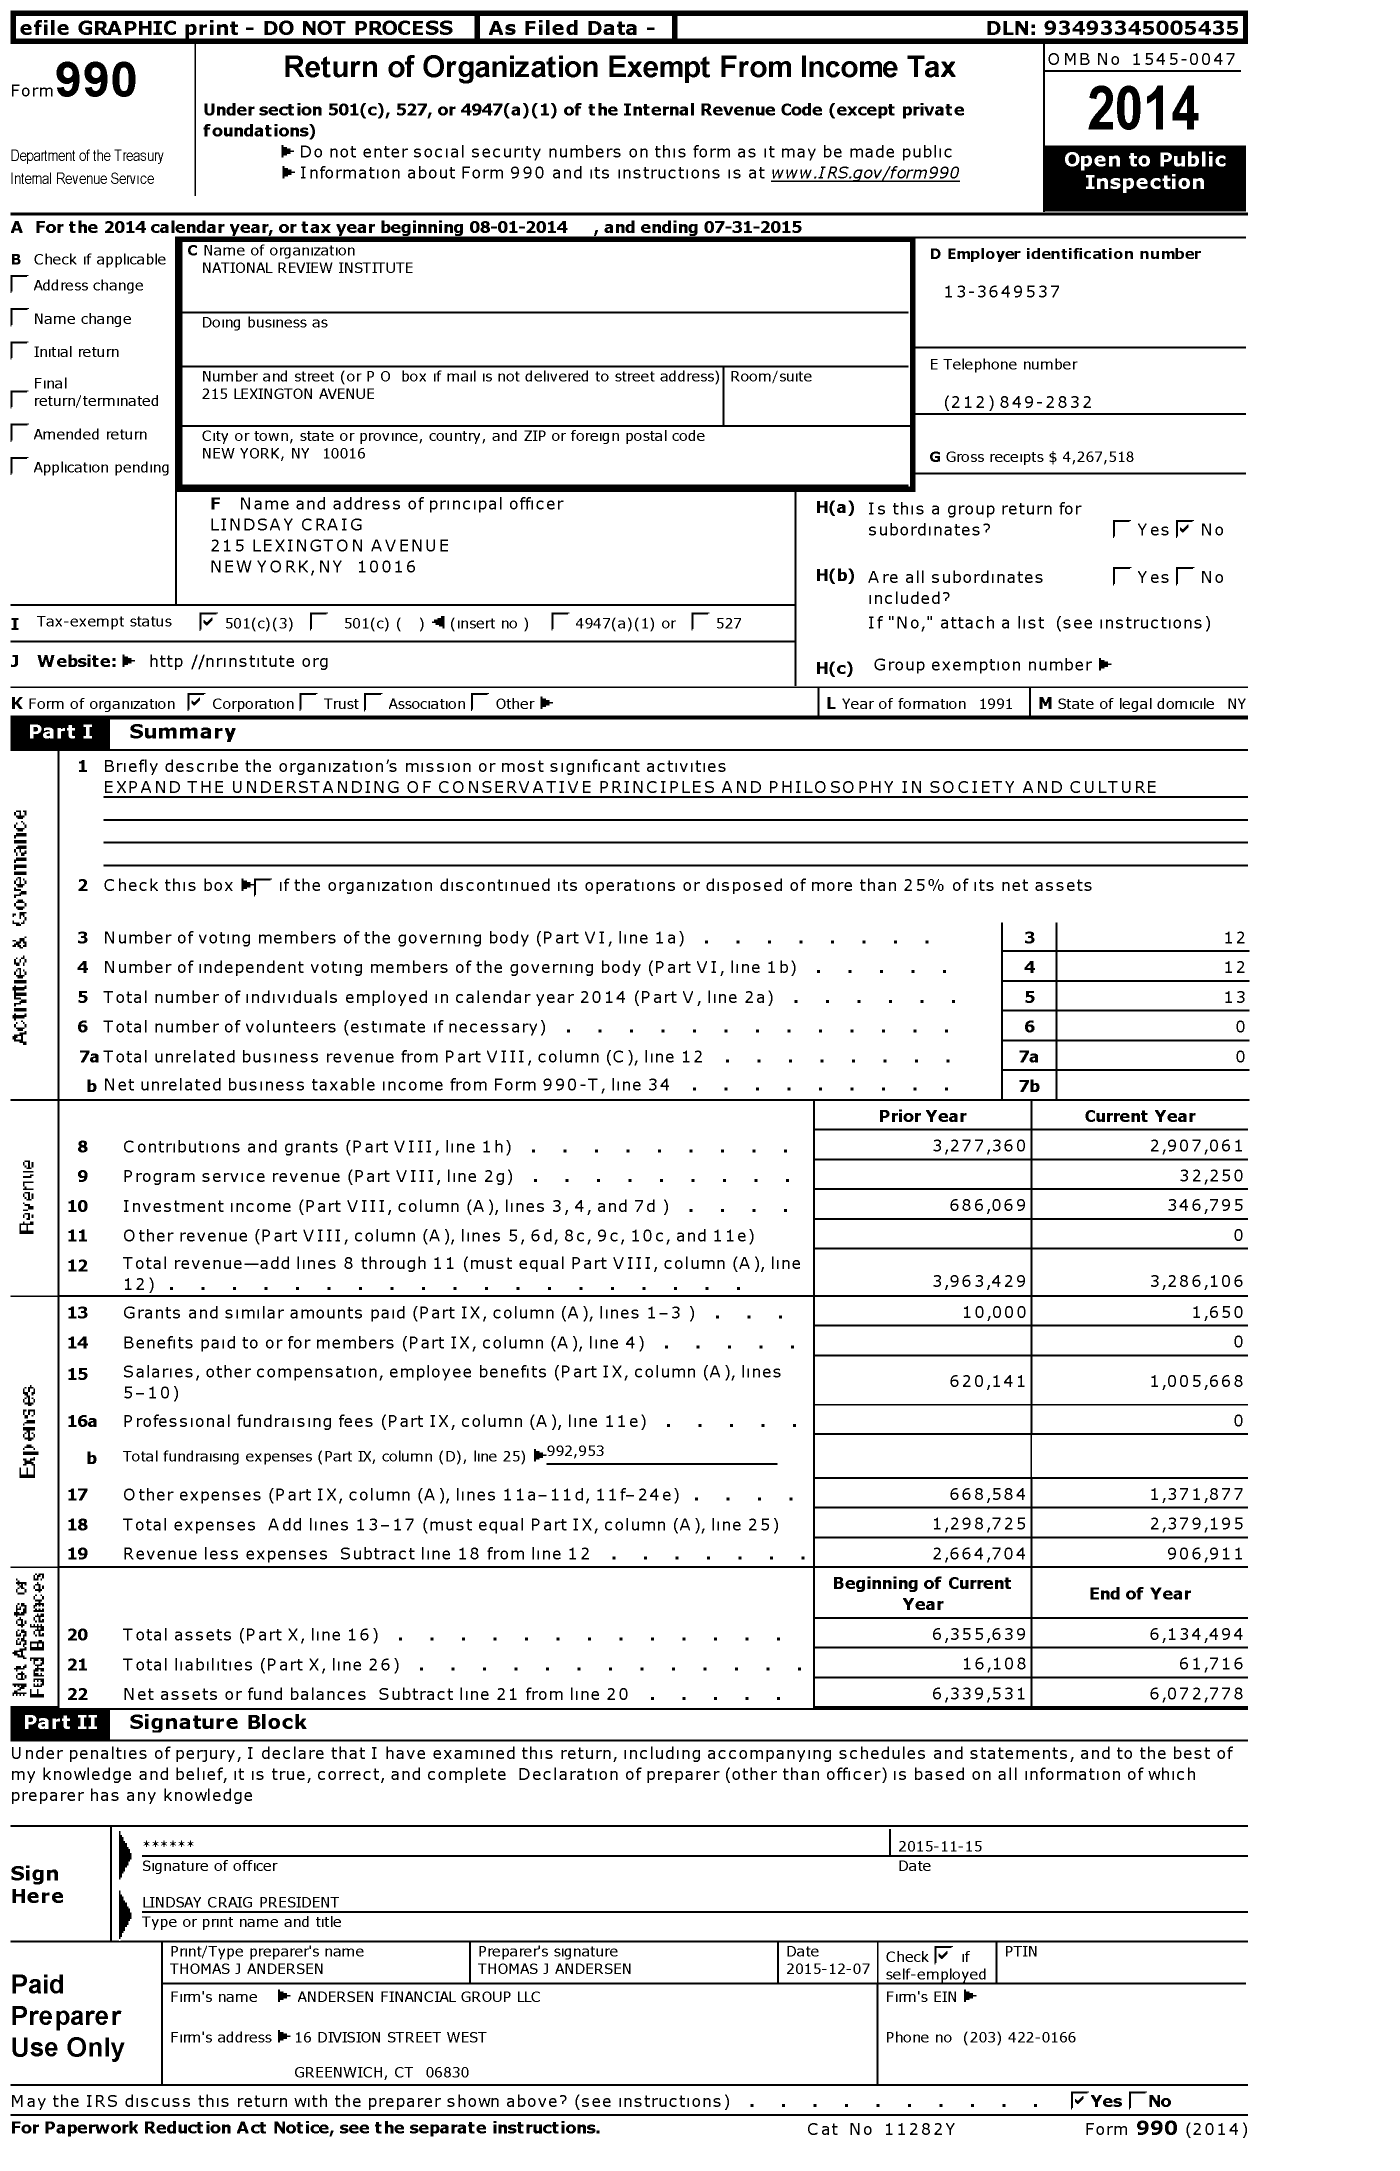 Image of first page of 2014 Form 990 for National Review Institute (NRI)